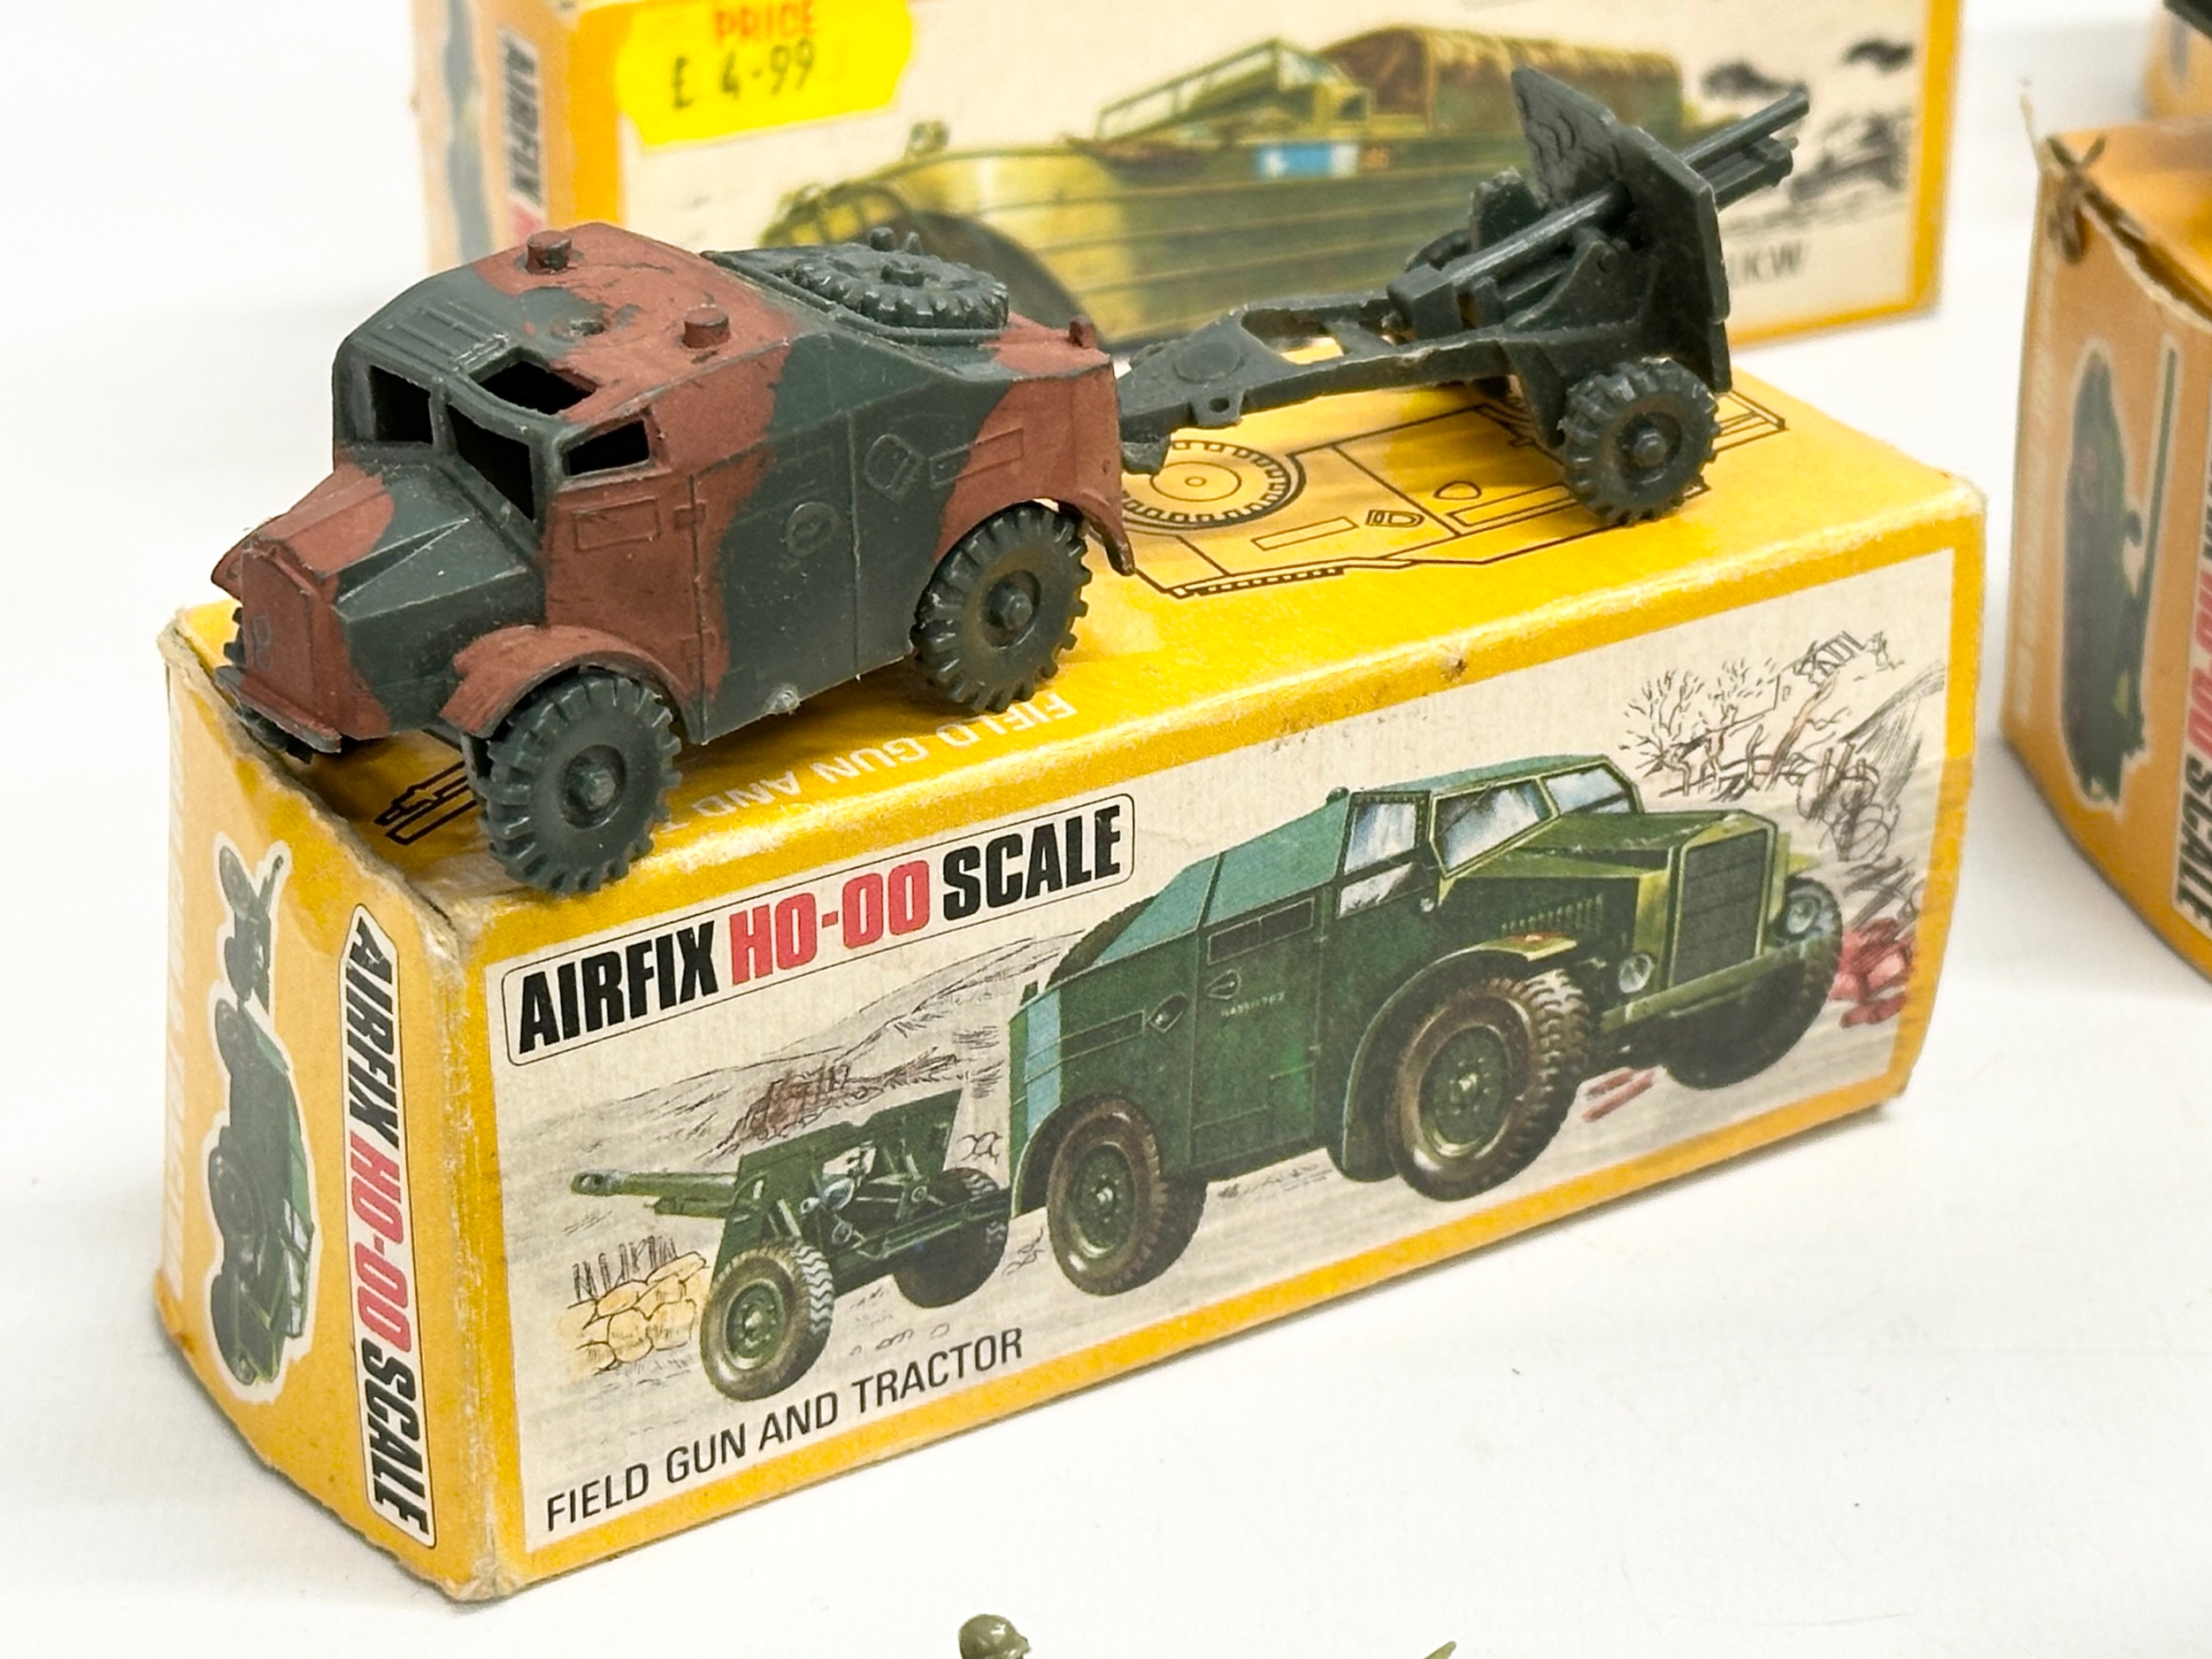 A collection of vintage Airfix HO-OO scale vehicles with boxes and soldiers. - Image 4 of 12